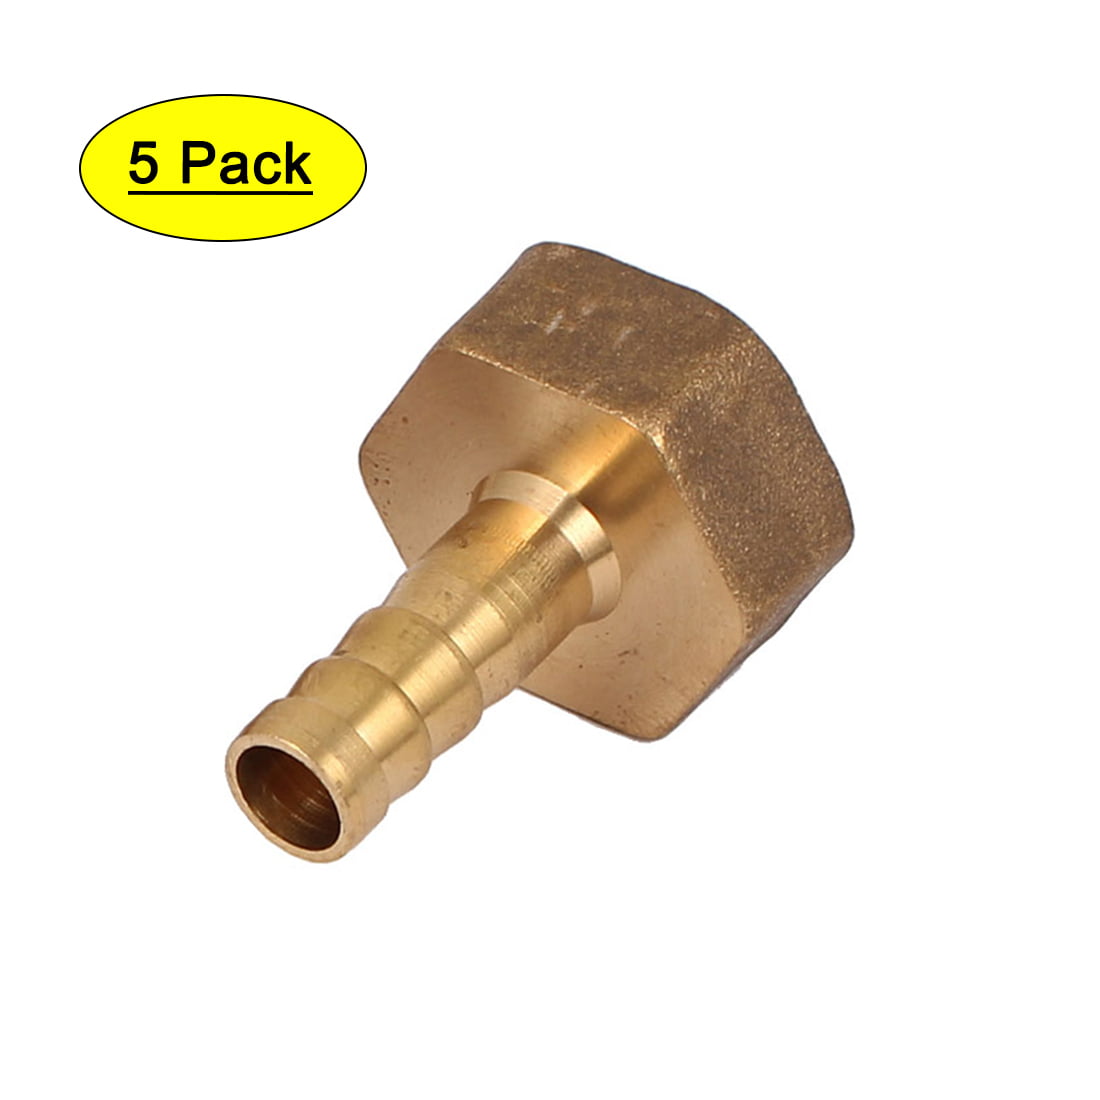 5Pcs Brass Pneumatic Piping Quick Coupler Female Thread to Hose Barb Fittings 